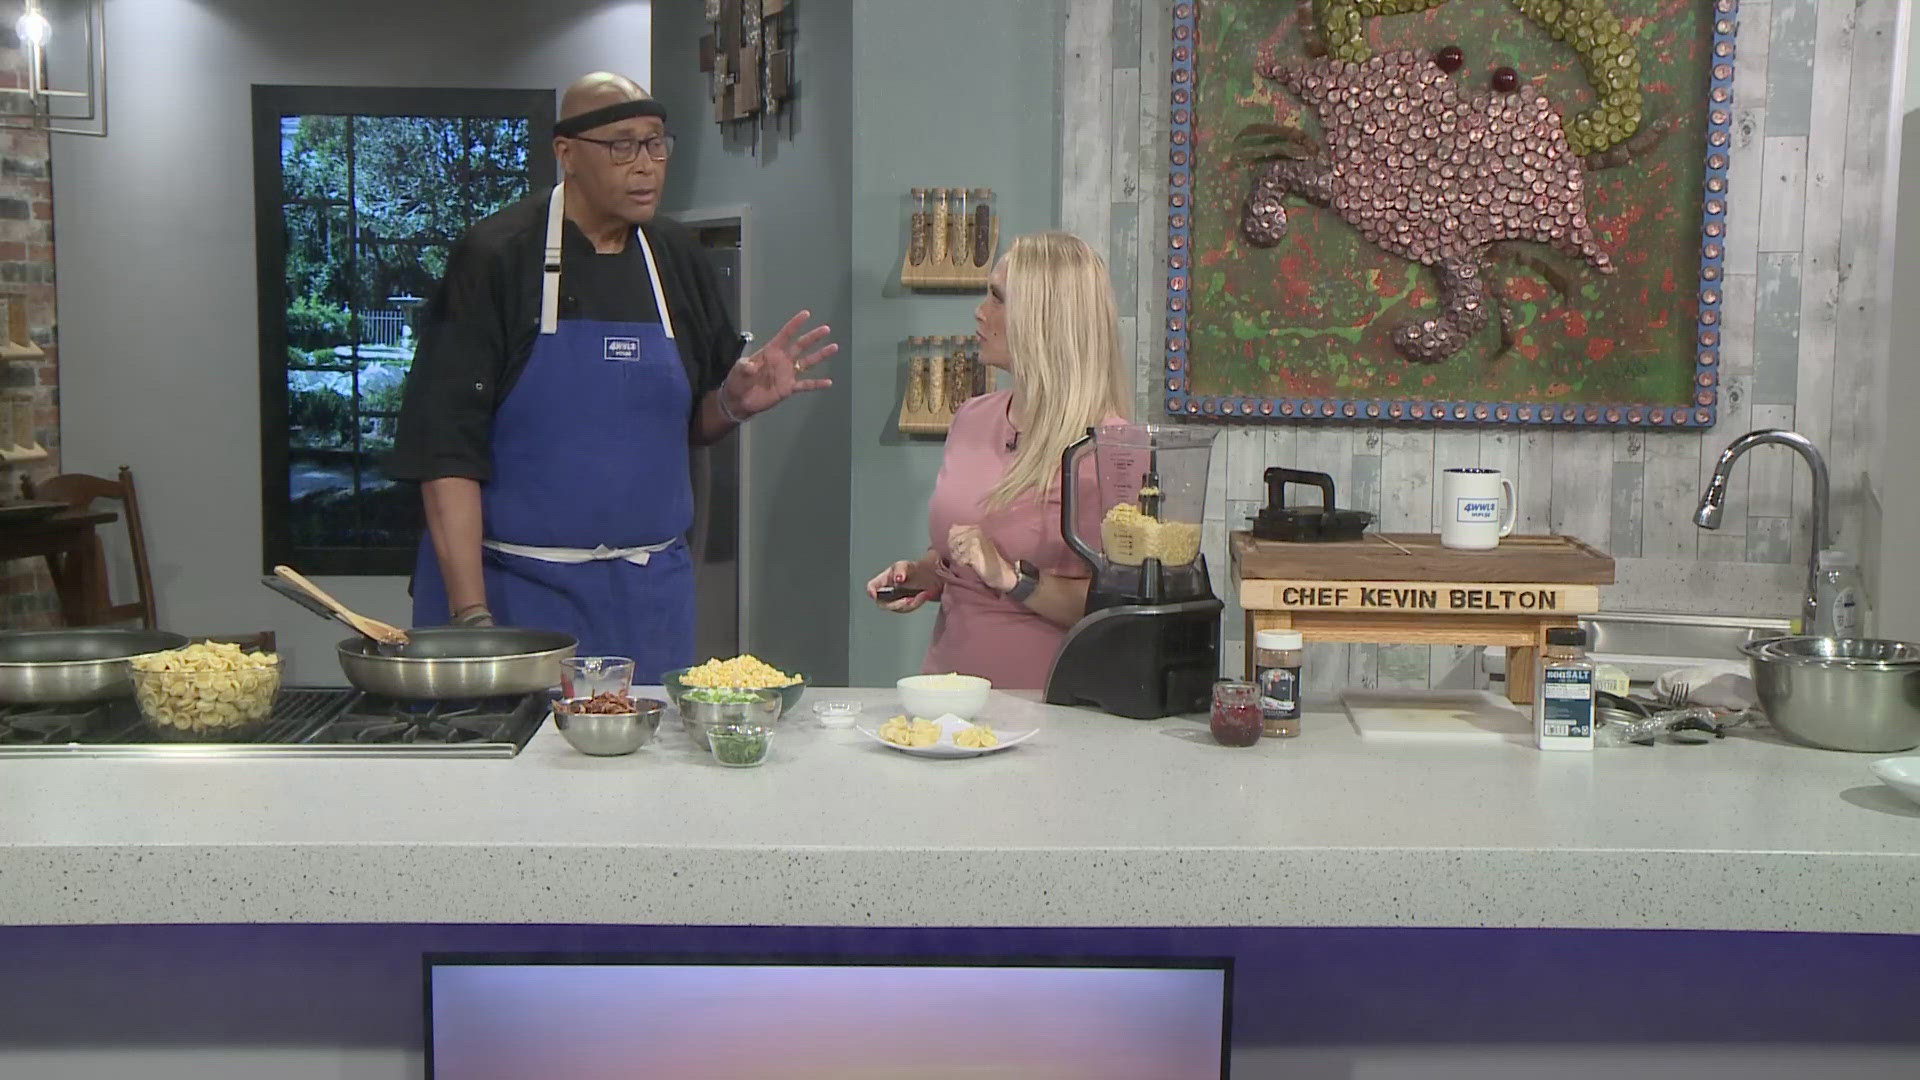 Chef Belton is cooking up a delicious pasta dish and pie in the WWL Louisiana kitchen